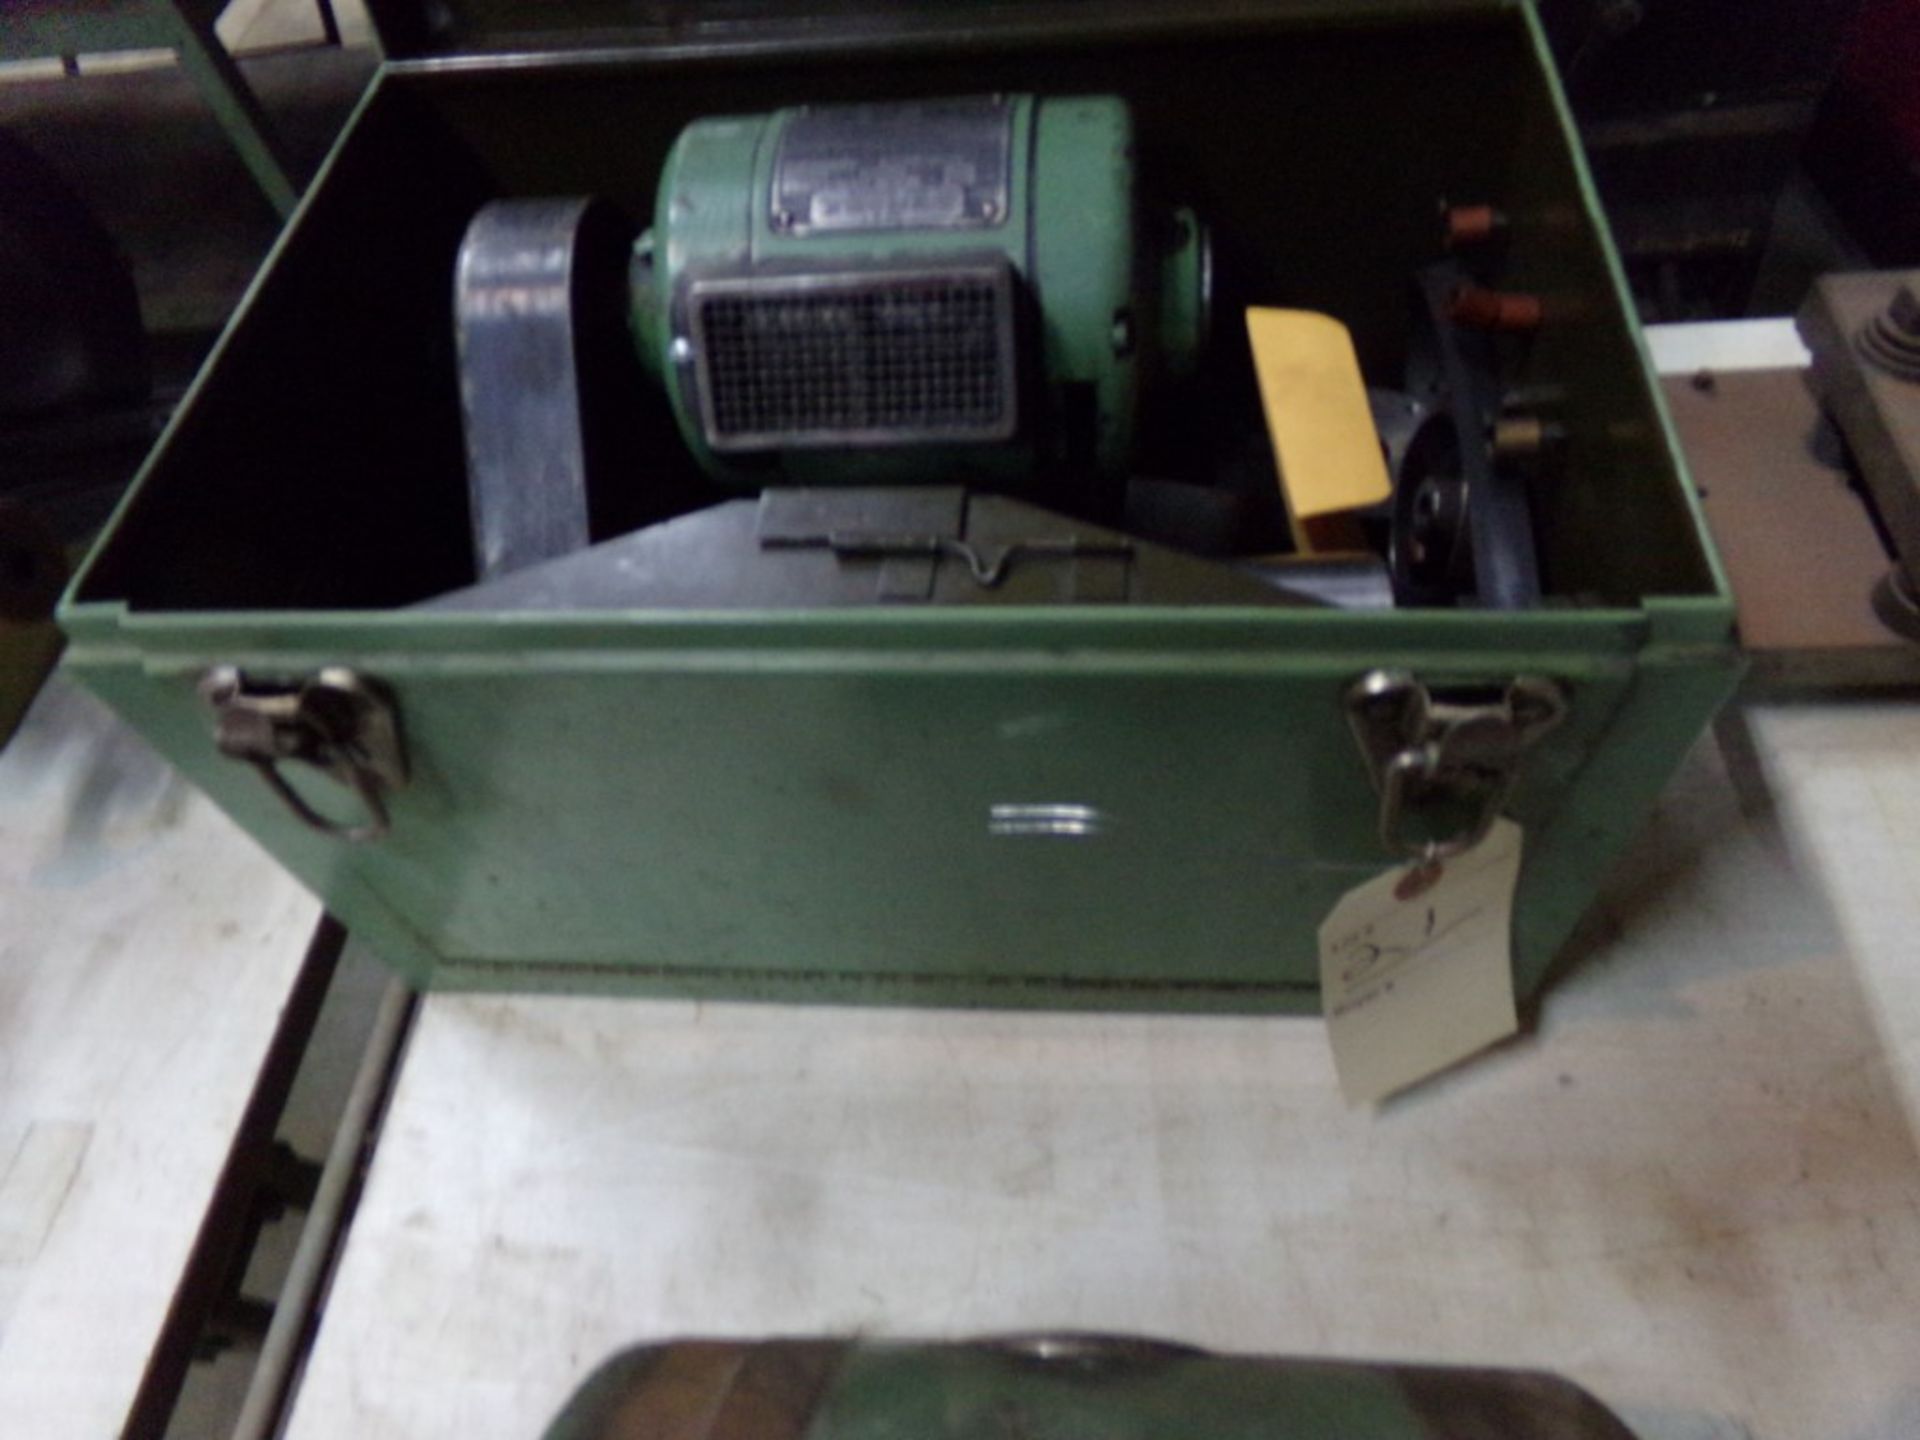 Tool Post Grinder, Dumore No. 5 ''The Master'', 115 Volts, In Original Box, Looks Complete